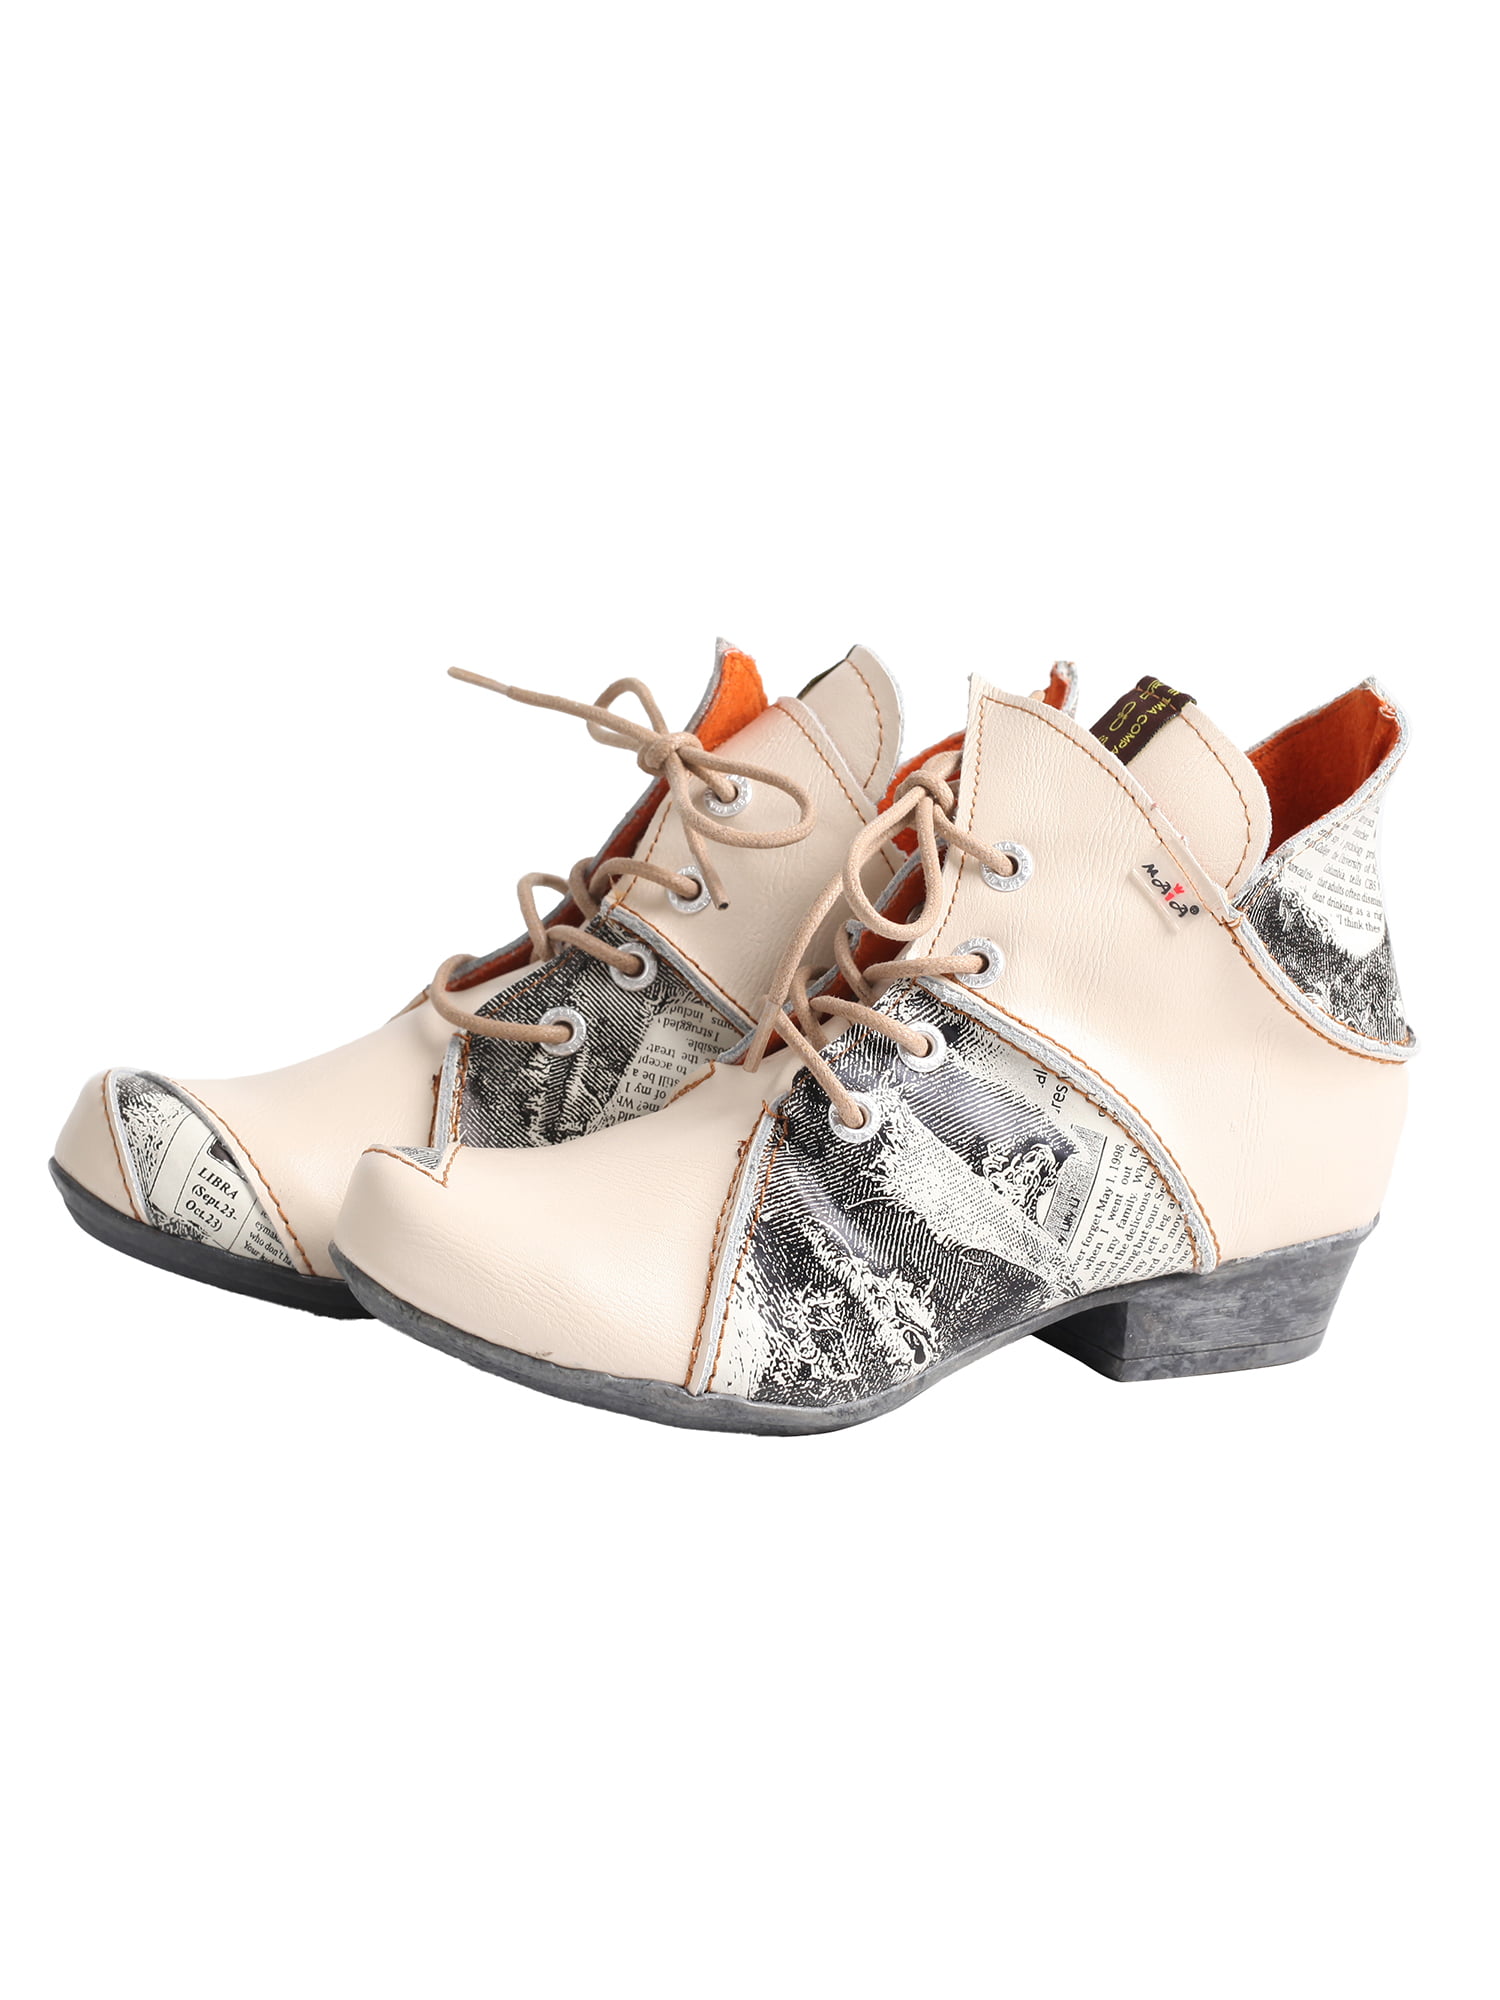 JOSEPH Printed Leather Ankle Boots in White Womens Shoes Boots Ankle boots 